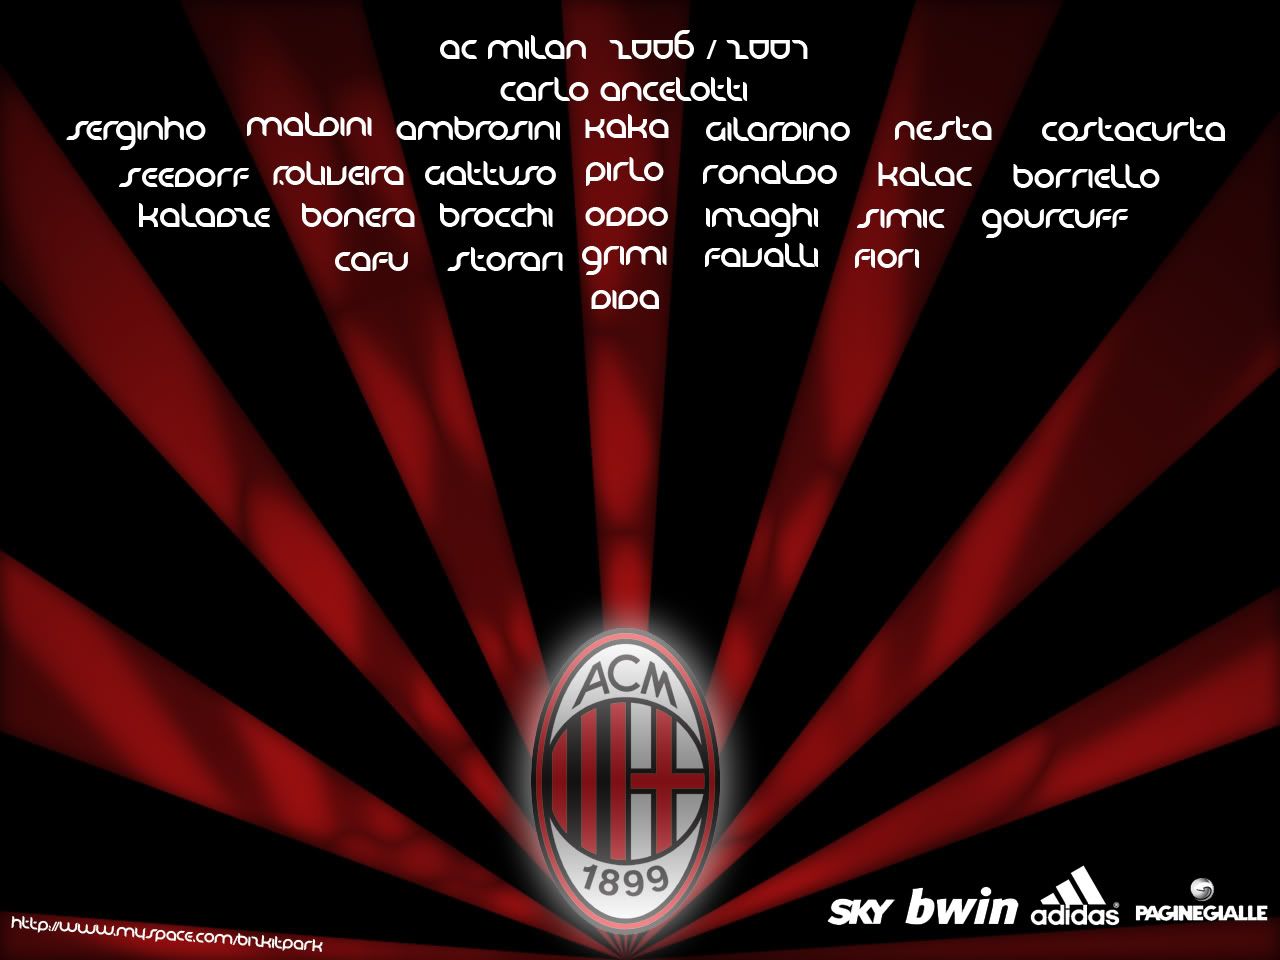 This Wallpaper is made by me for AC Milan Team "though im not a fan"